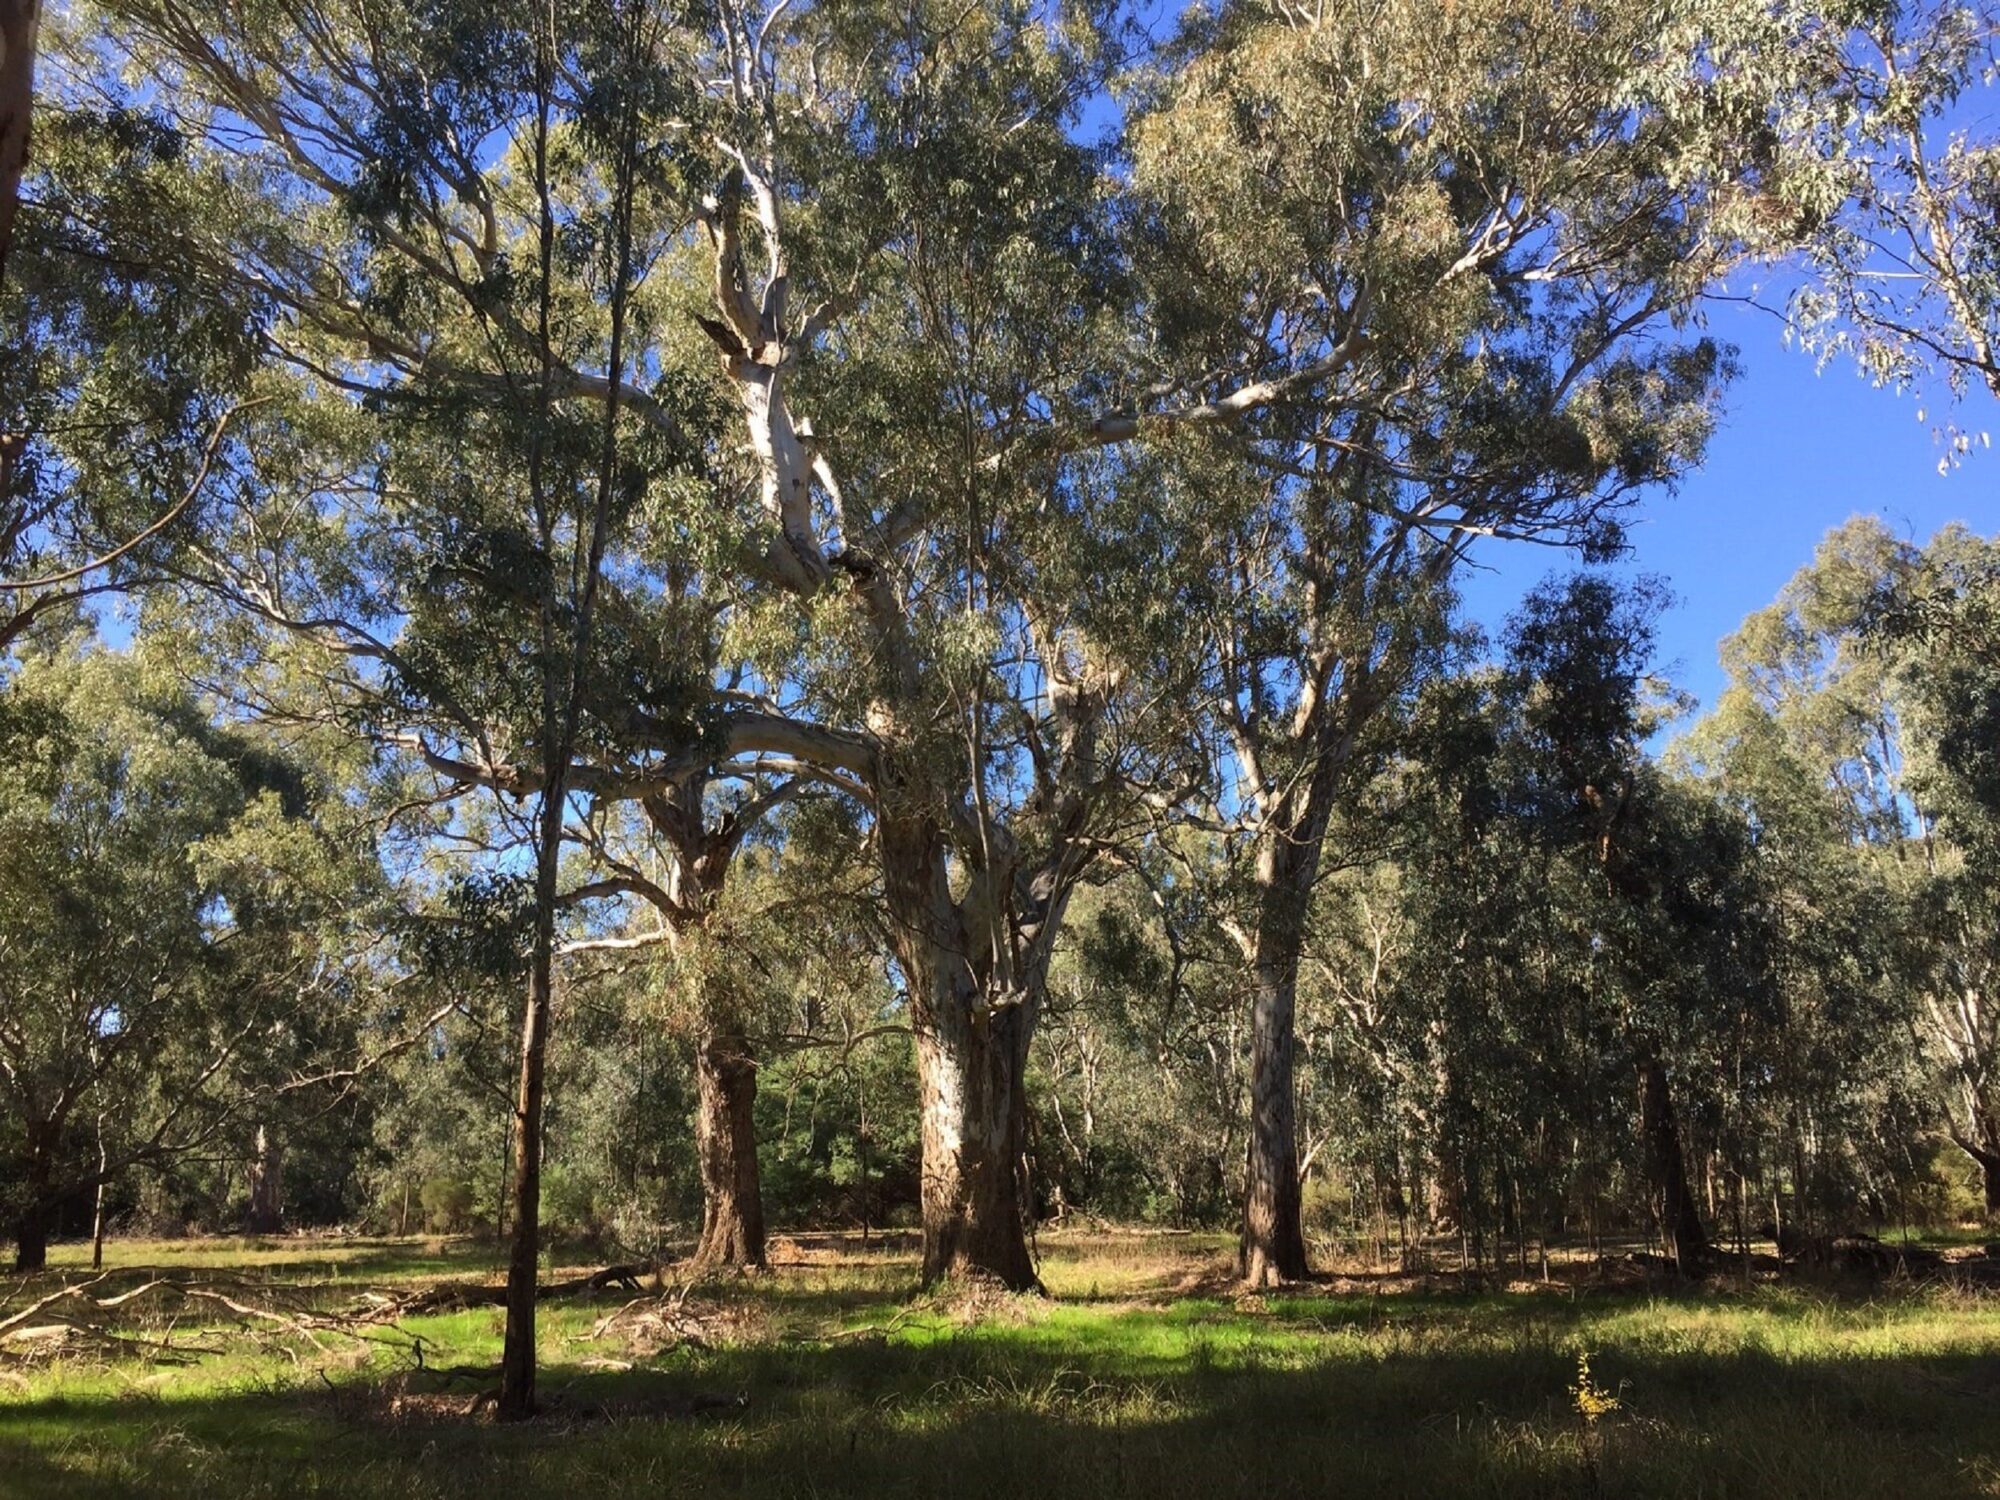 Huge gum tree in the middle with directional branches, smaller gum trees, blue sky, green grass